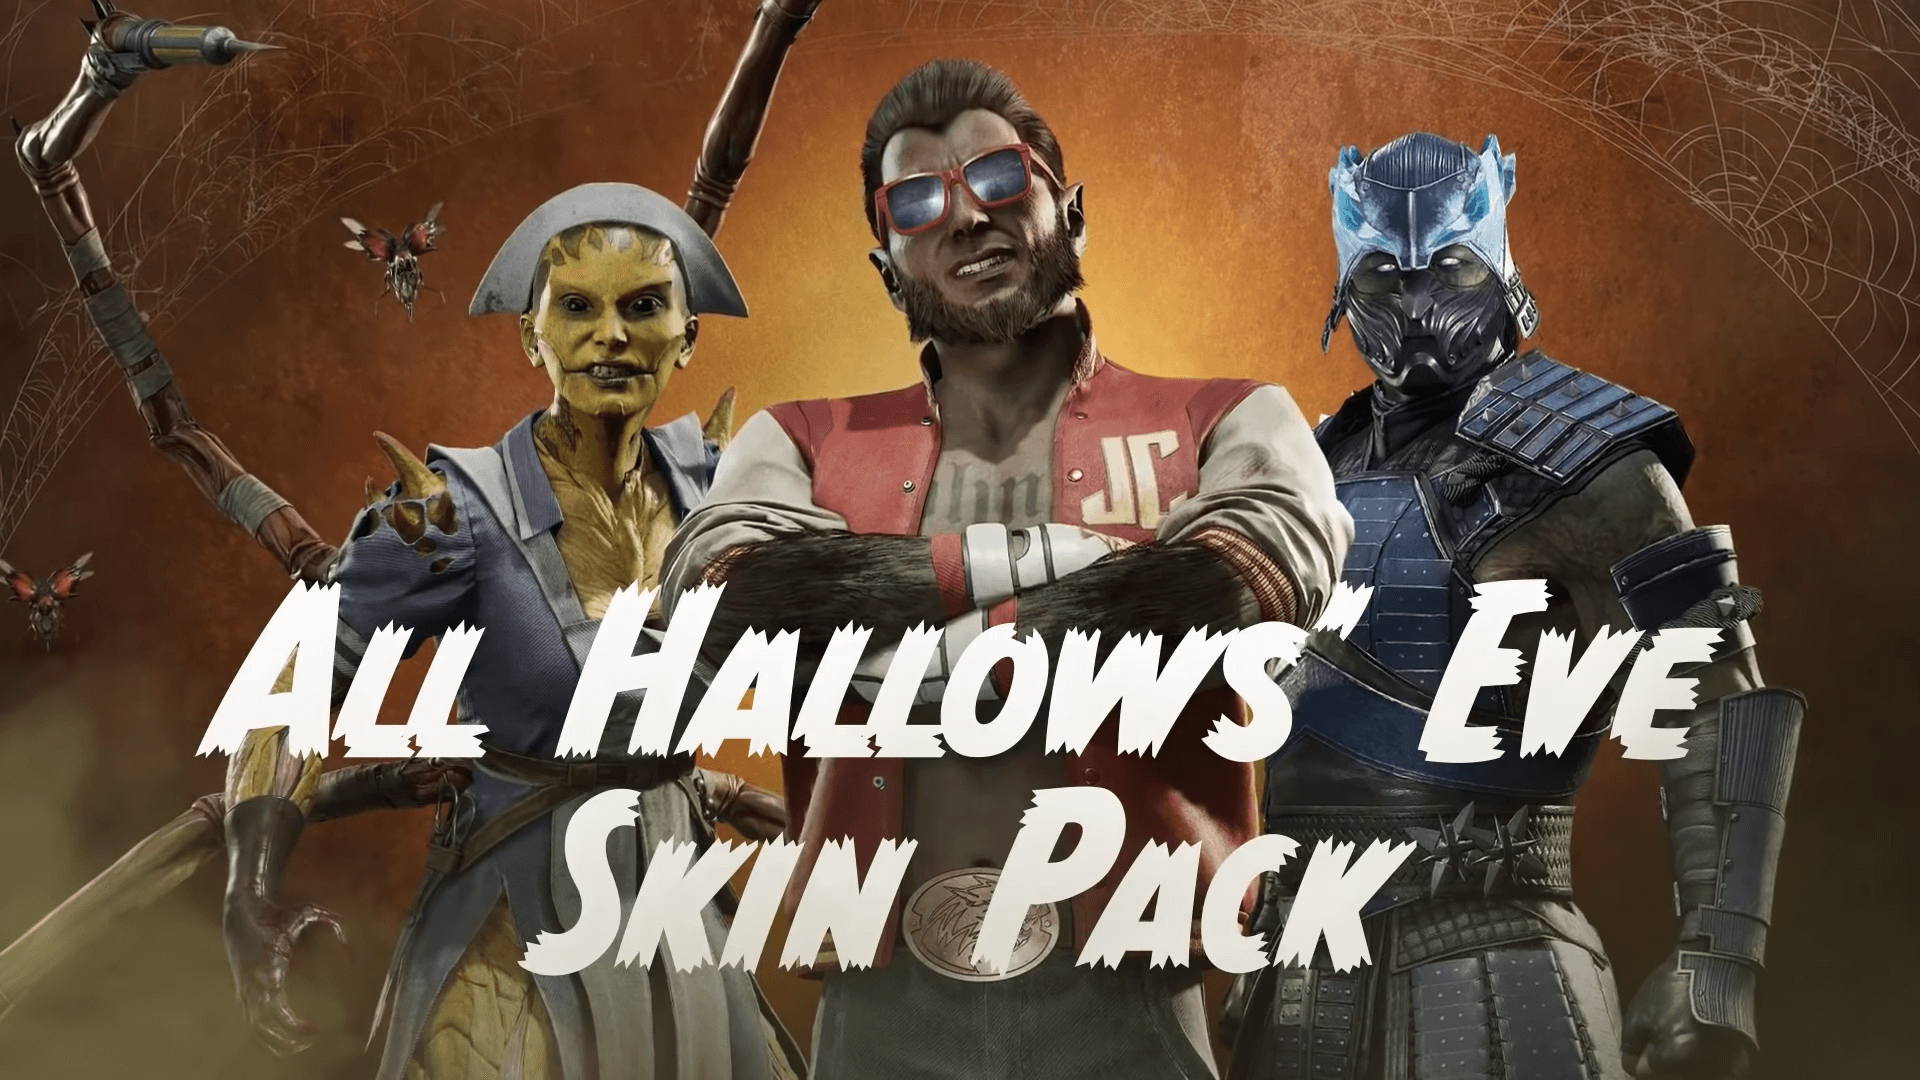 Halloween Skin Pack is Available Now for Mortal Kombat 11